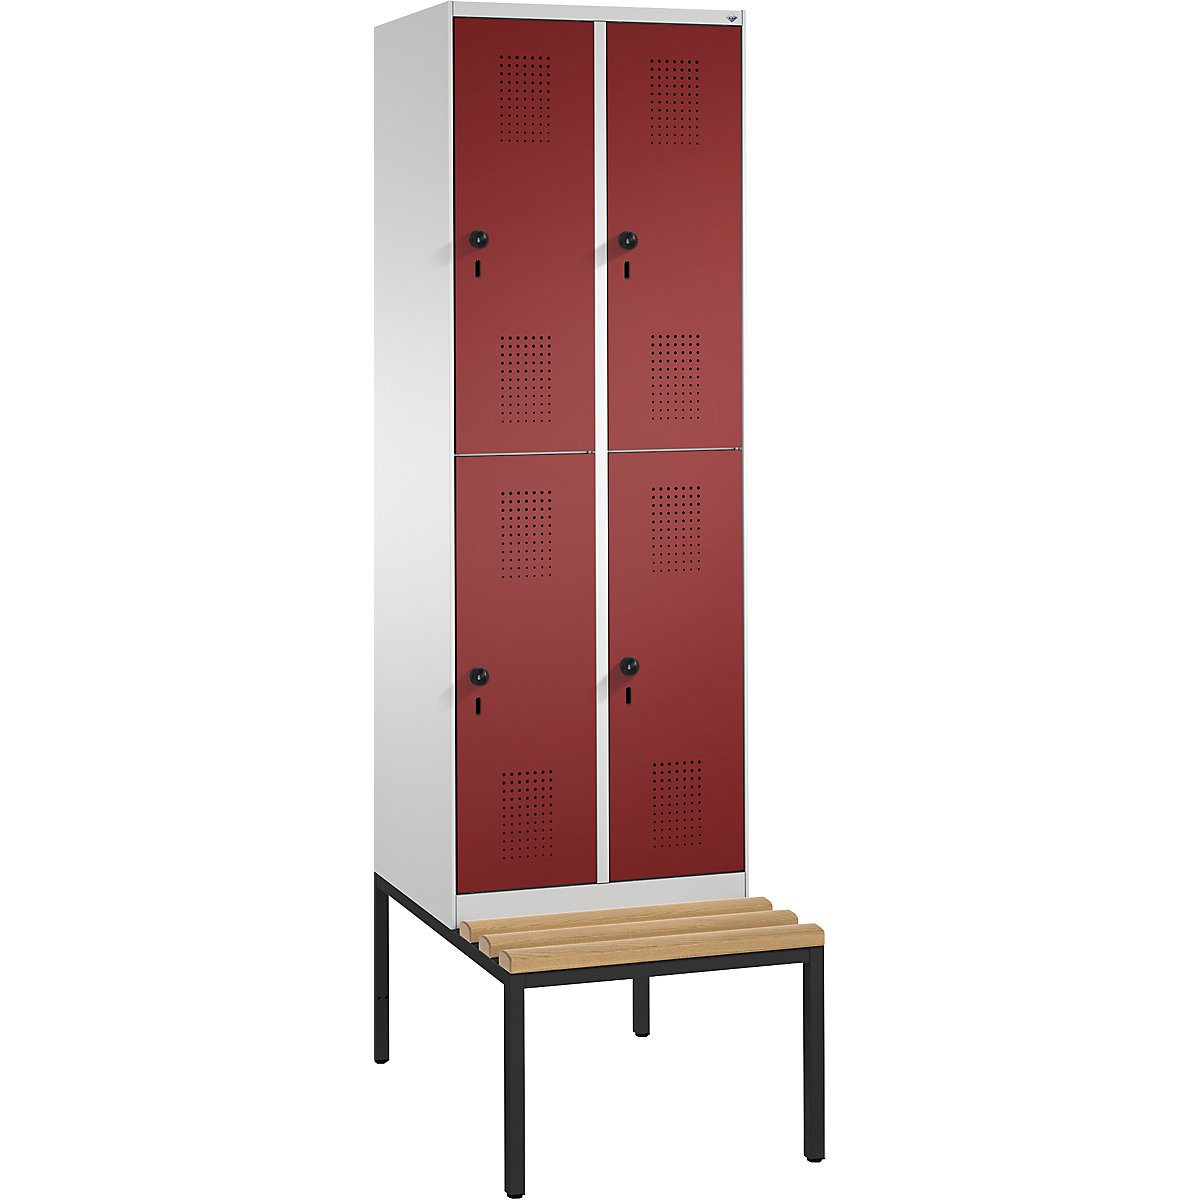 EVOLO cloakroom locker, double tier, with bench – C+P, 2 compartments, 2 shelf compartments each, compartment width 300 mm, light grey / ruby red-17